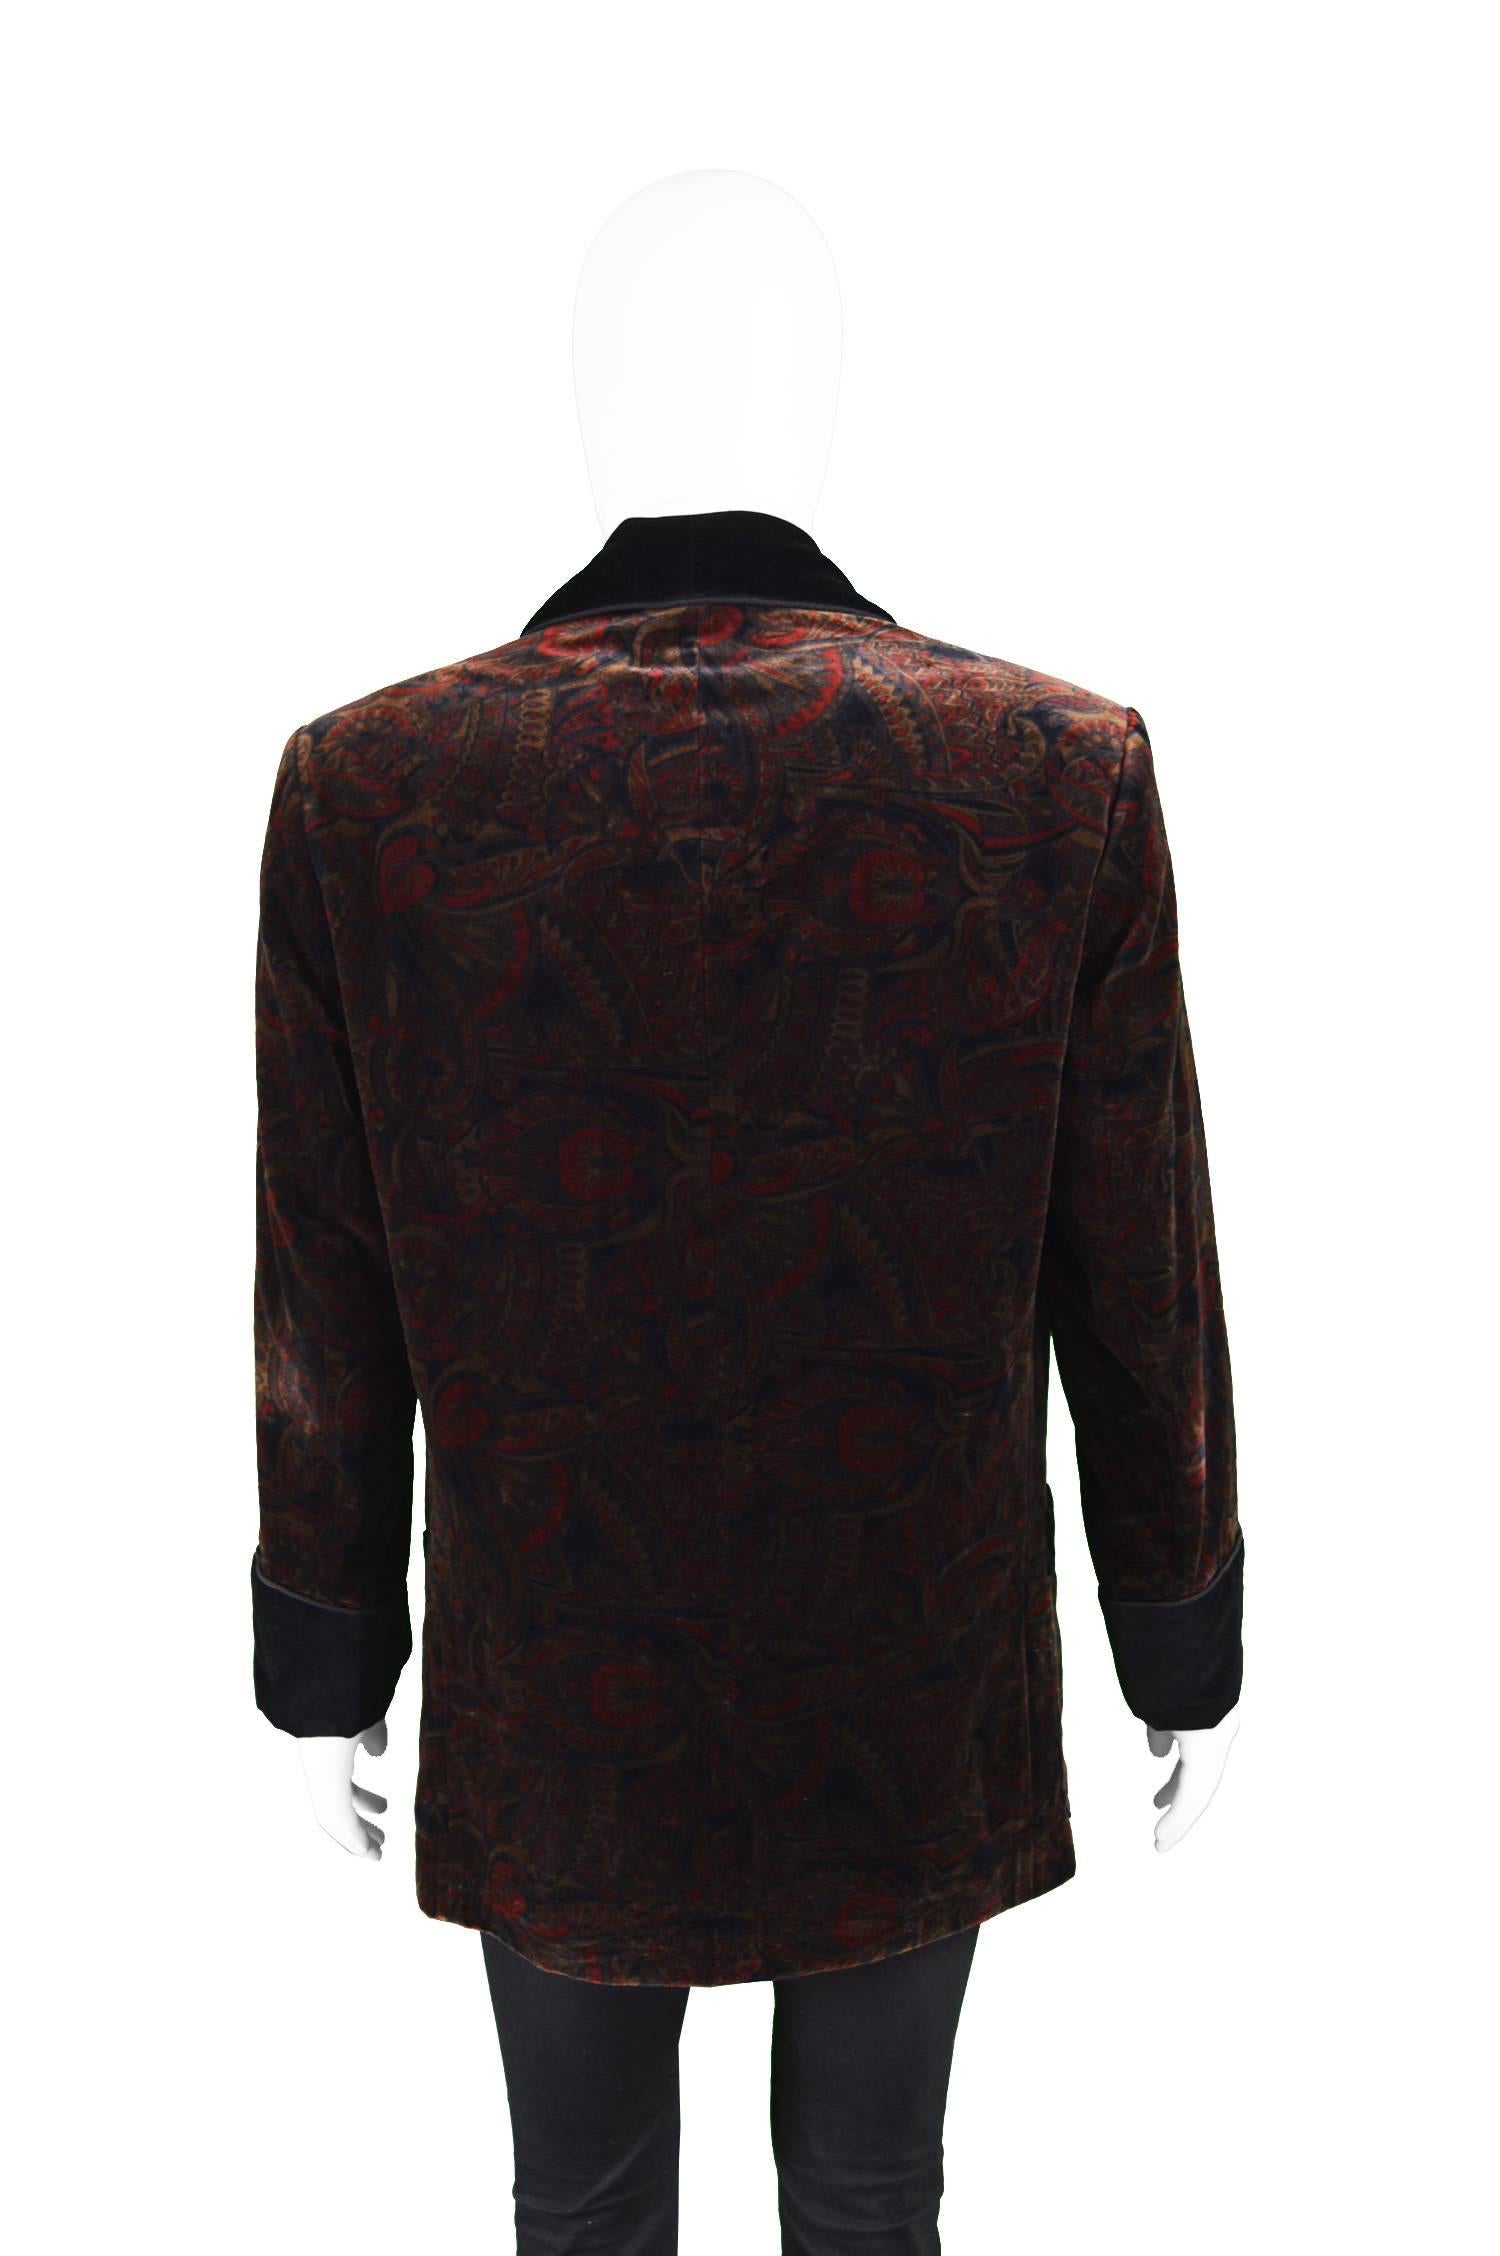 Men's Vintage Paisley Print Velvet Smoking Jacket with Braided Lapels, 1980s For Sale 2